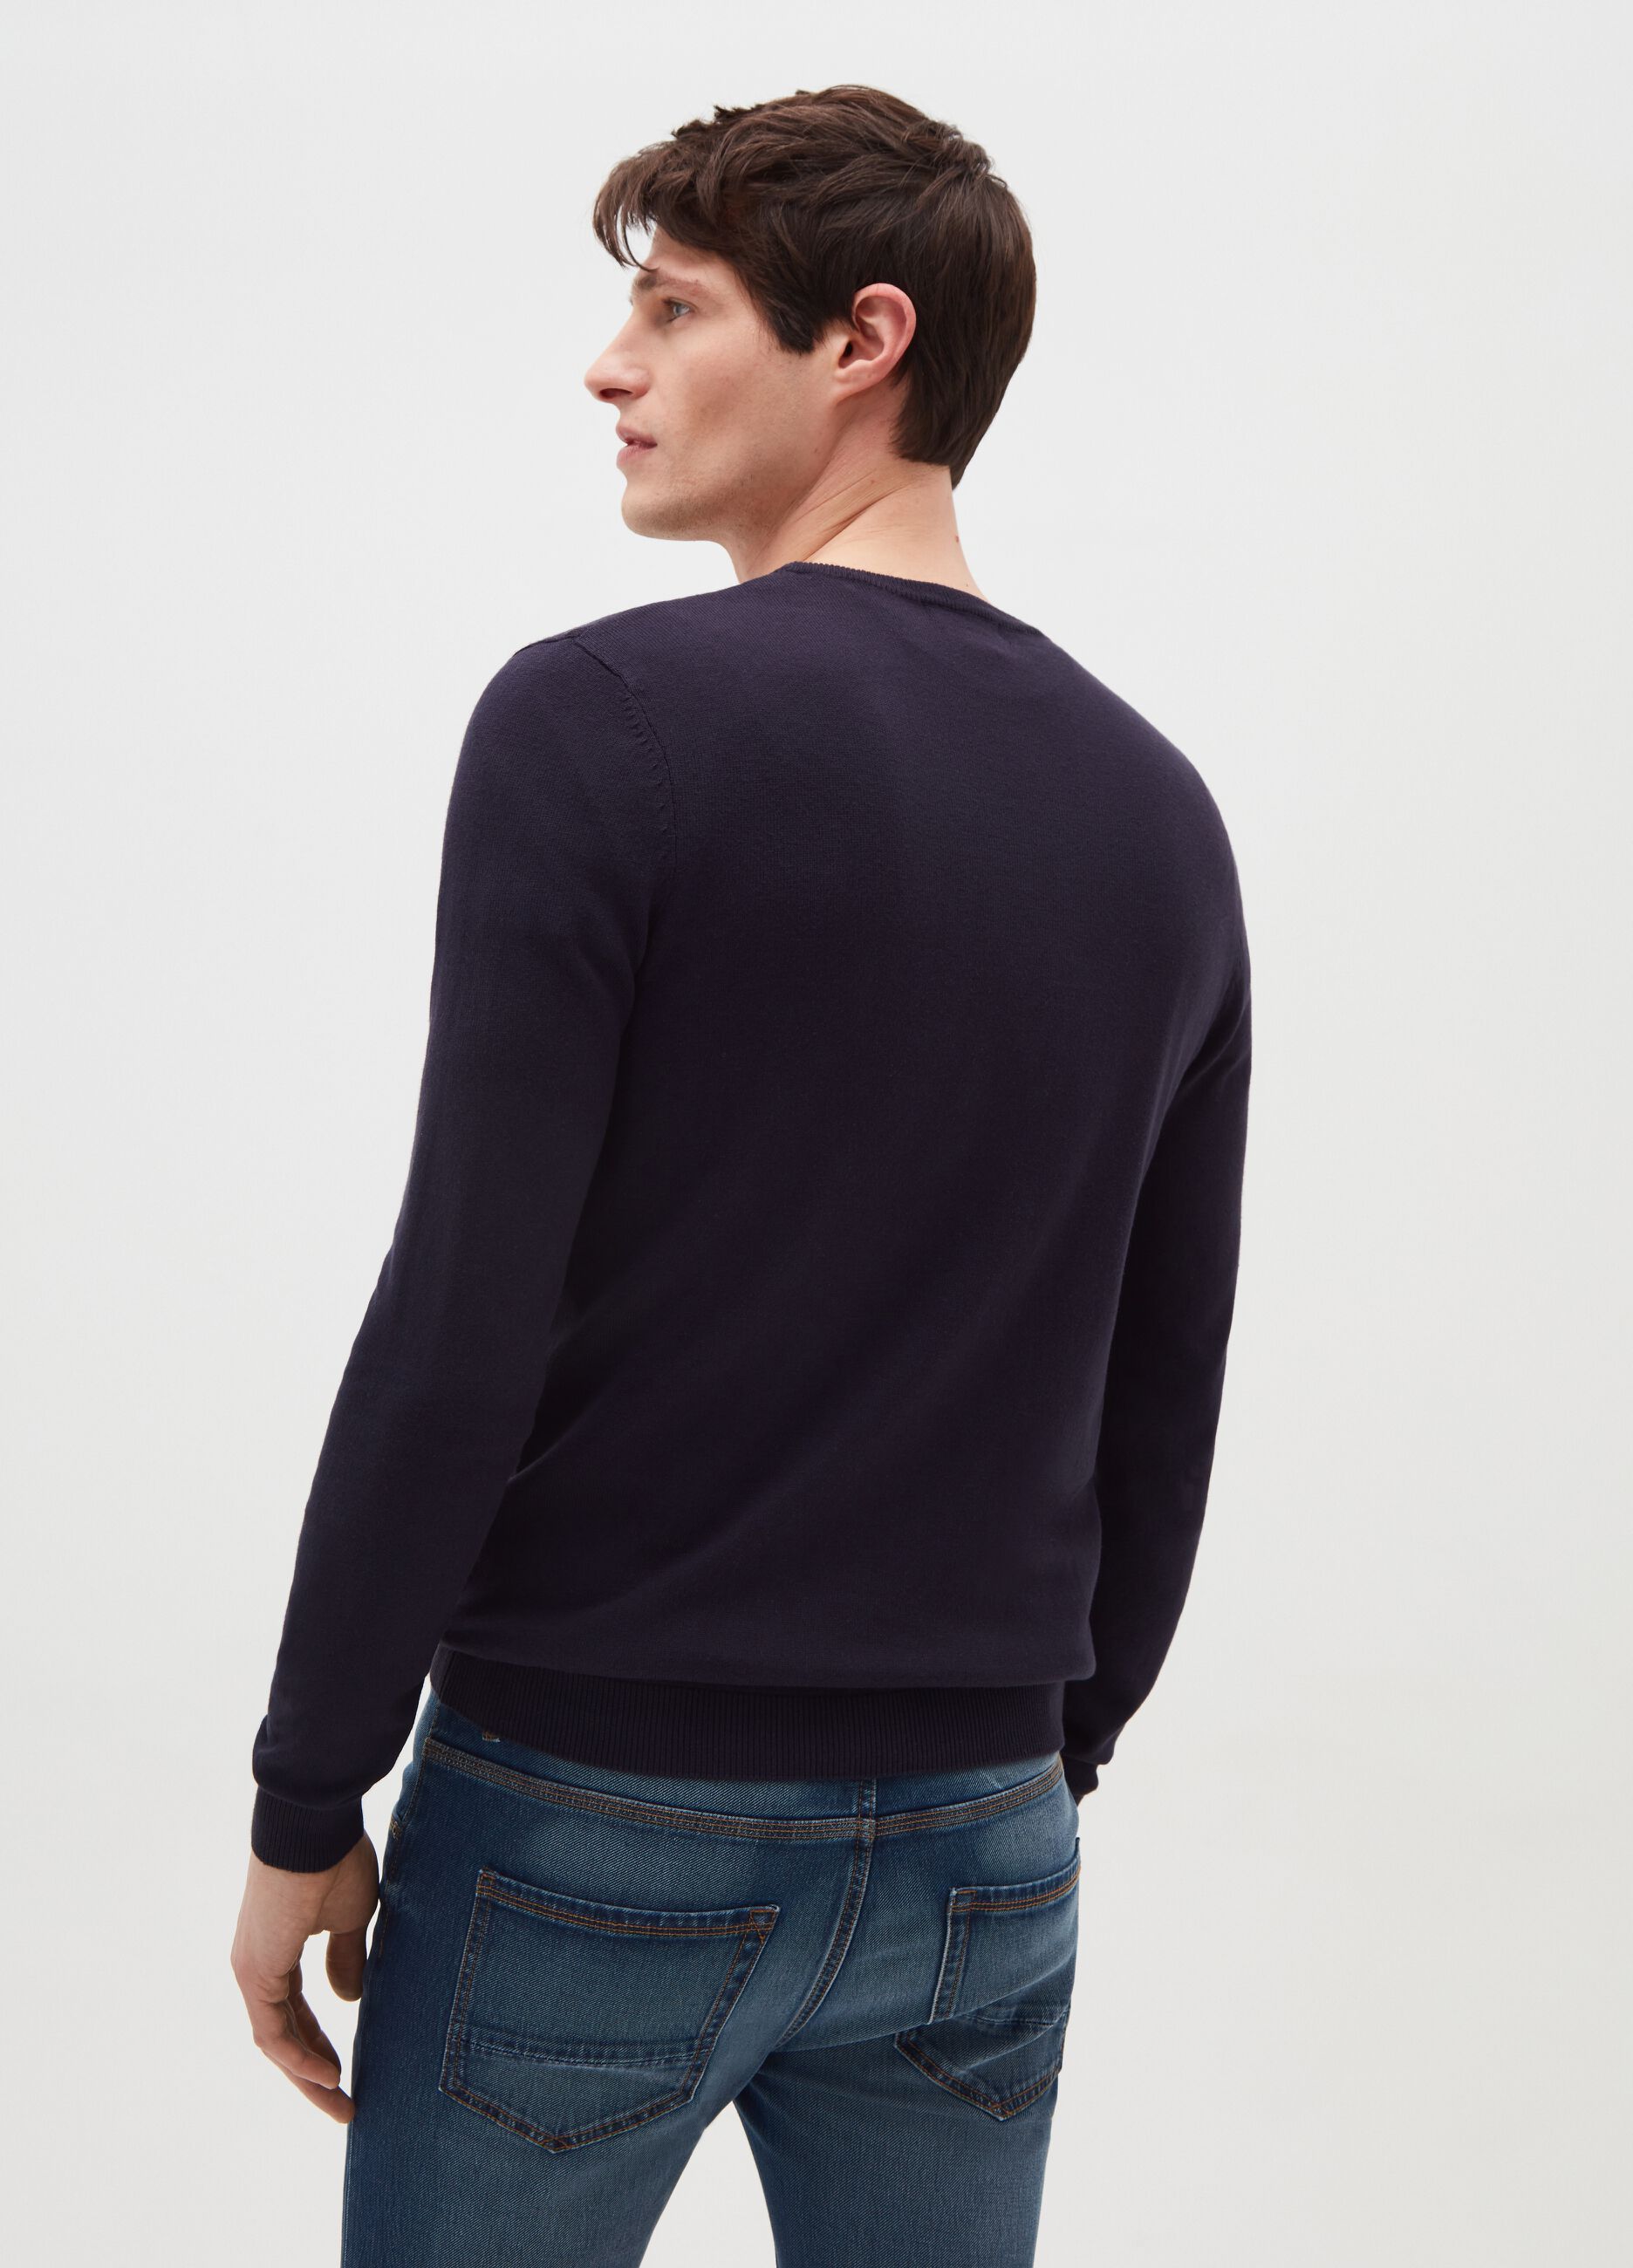 Cotton blend pullover with round neck